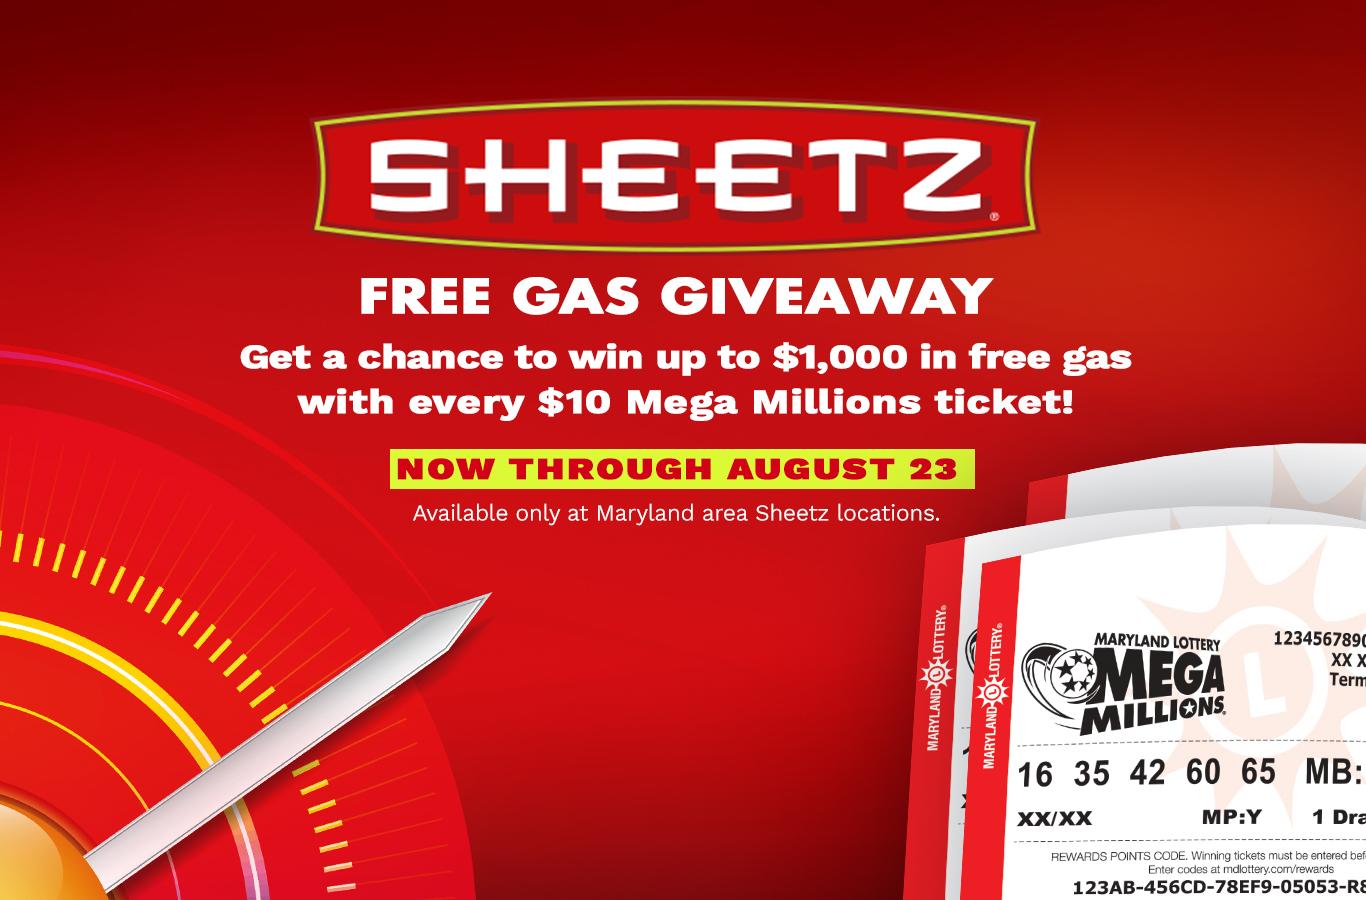 Enter Mega Millions tickets for a chance to win free gas from Sheetz®!